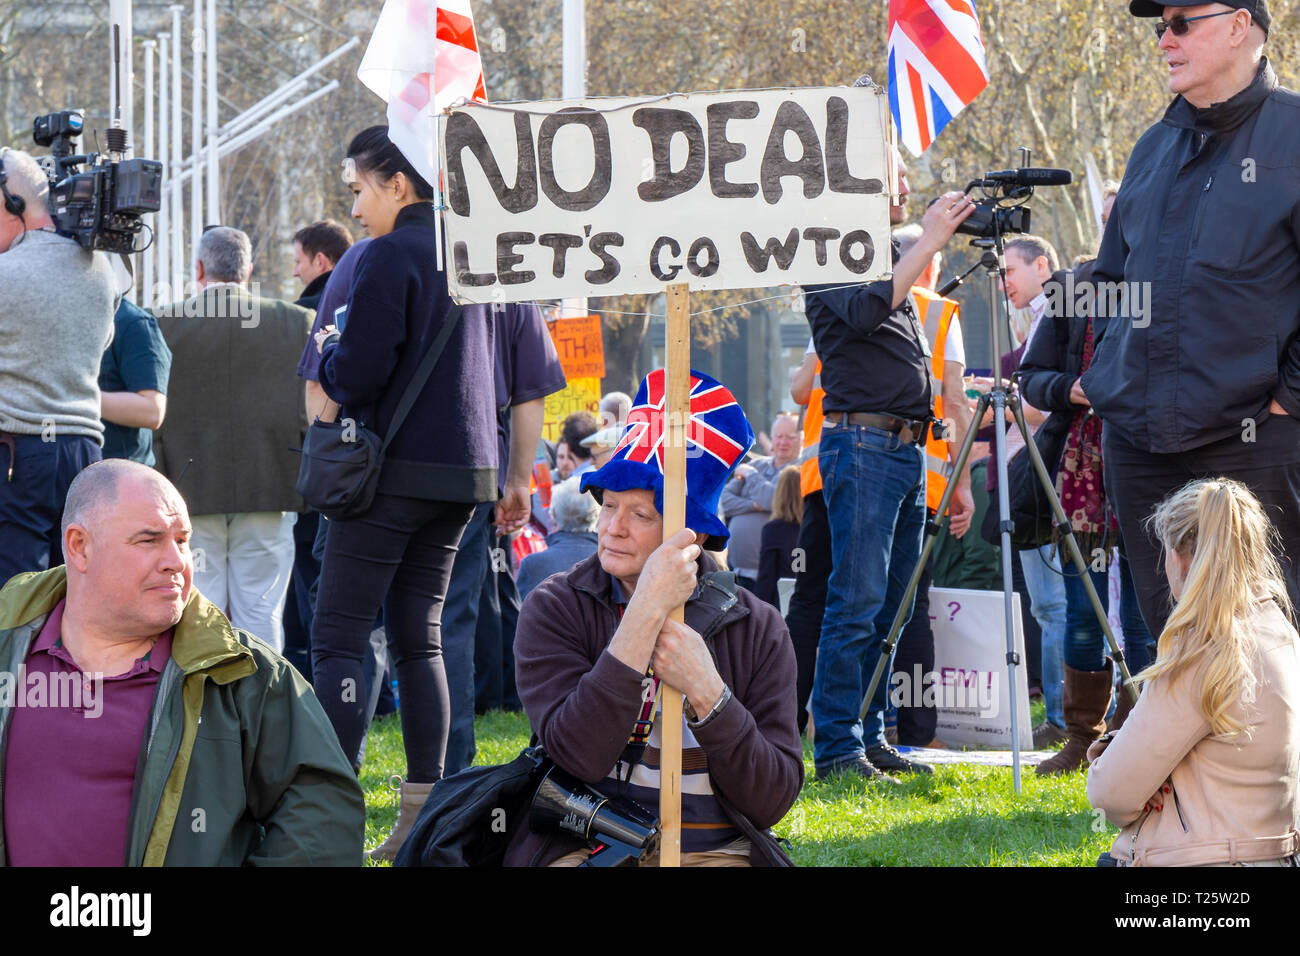 Westminster, London, UK; 29th March 2019; Male Pro-Brexit Demonstrator With Home Made Sign and Wearing Union Jack Hat Seated During Protest Rally Stock Photo